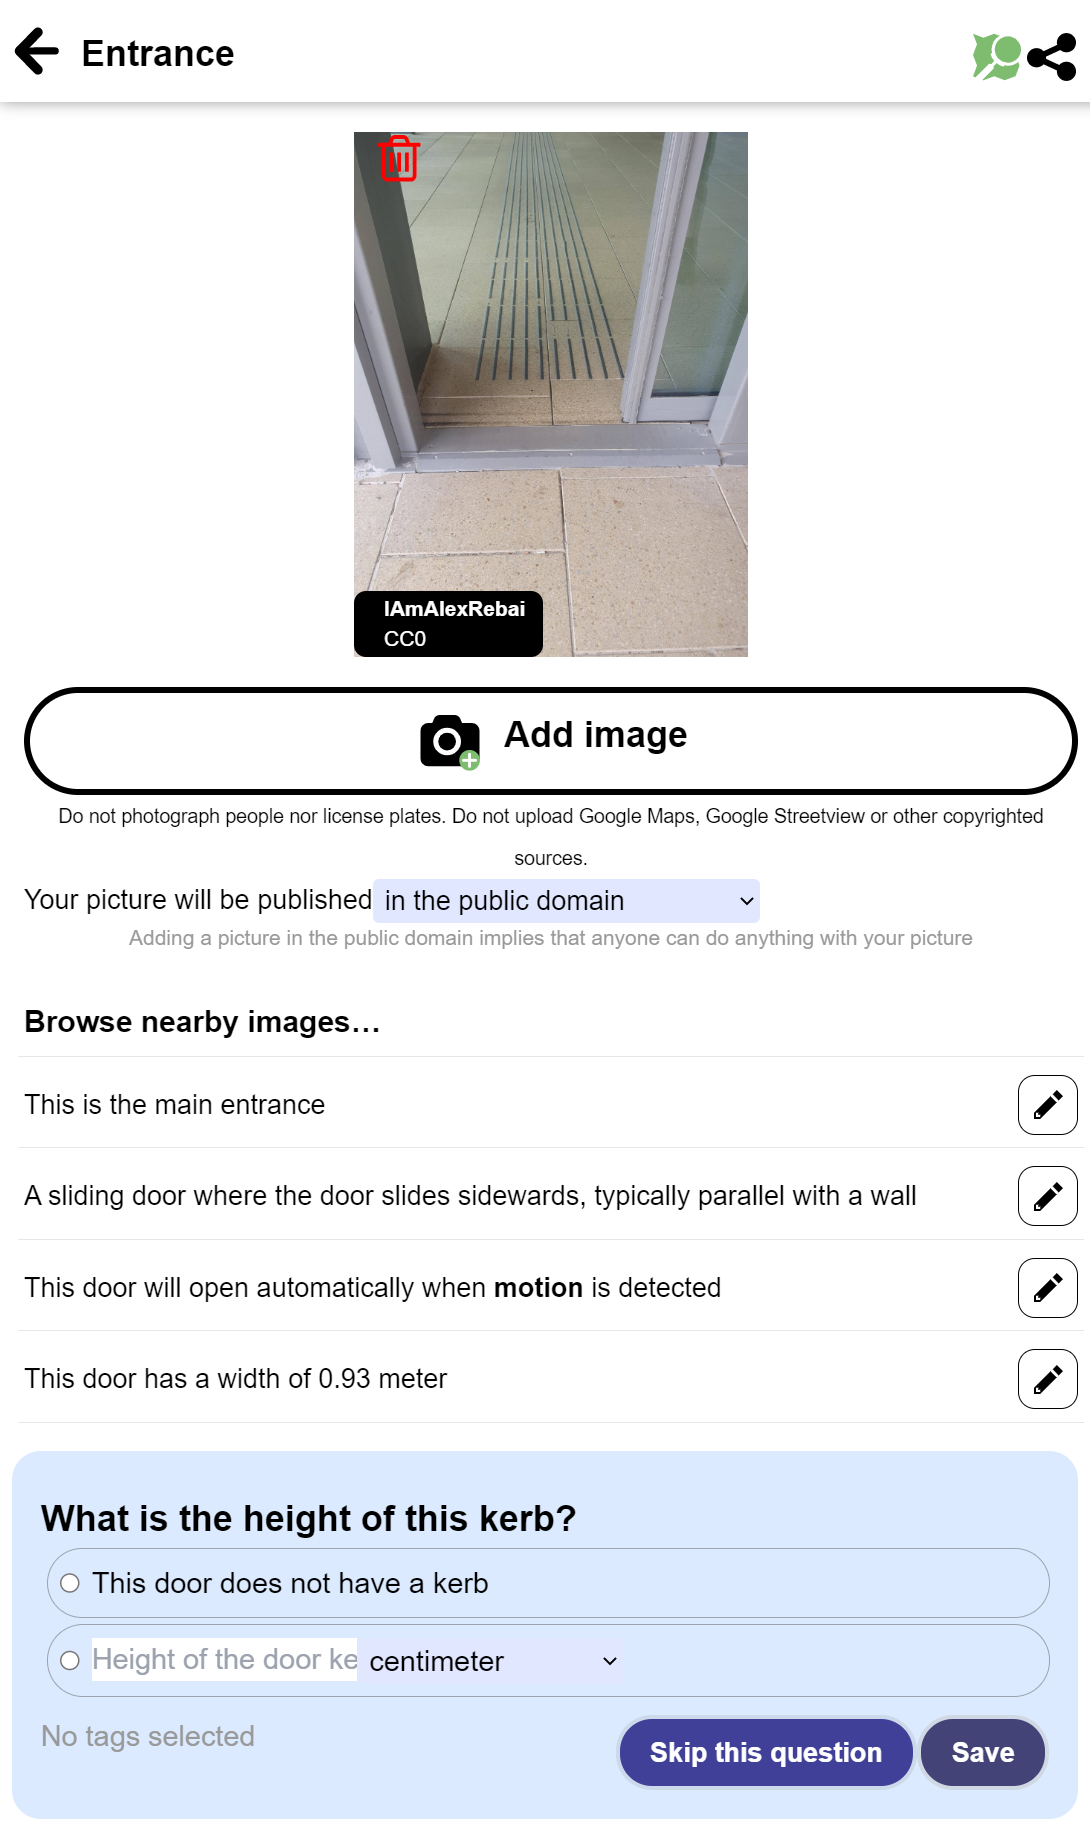 Screenshot with image of a door, a list of properties of the door and a question about the door kerb